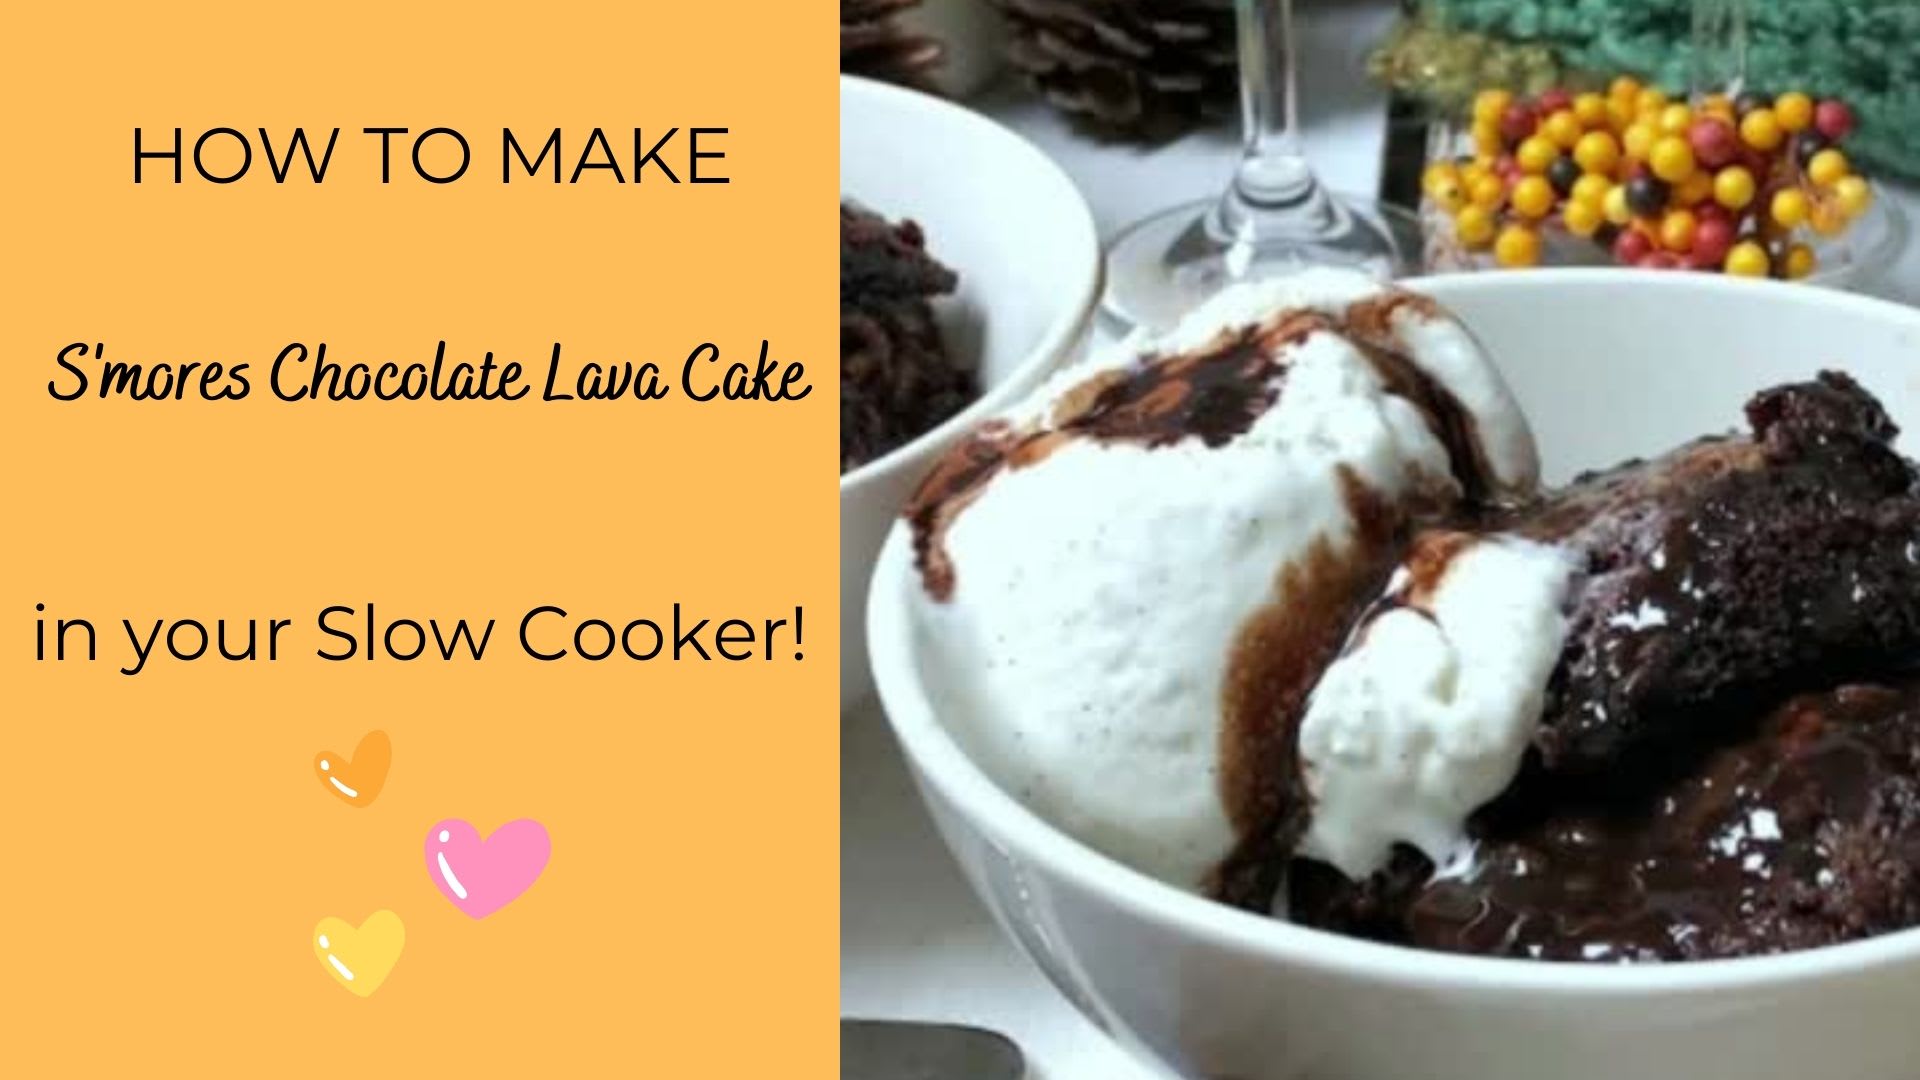 Crockpot Lava Cake (made magically in the slow cooker!)